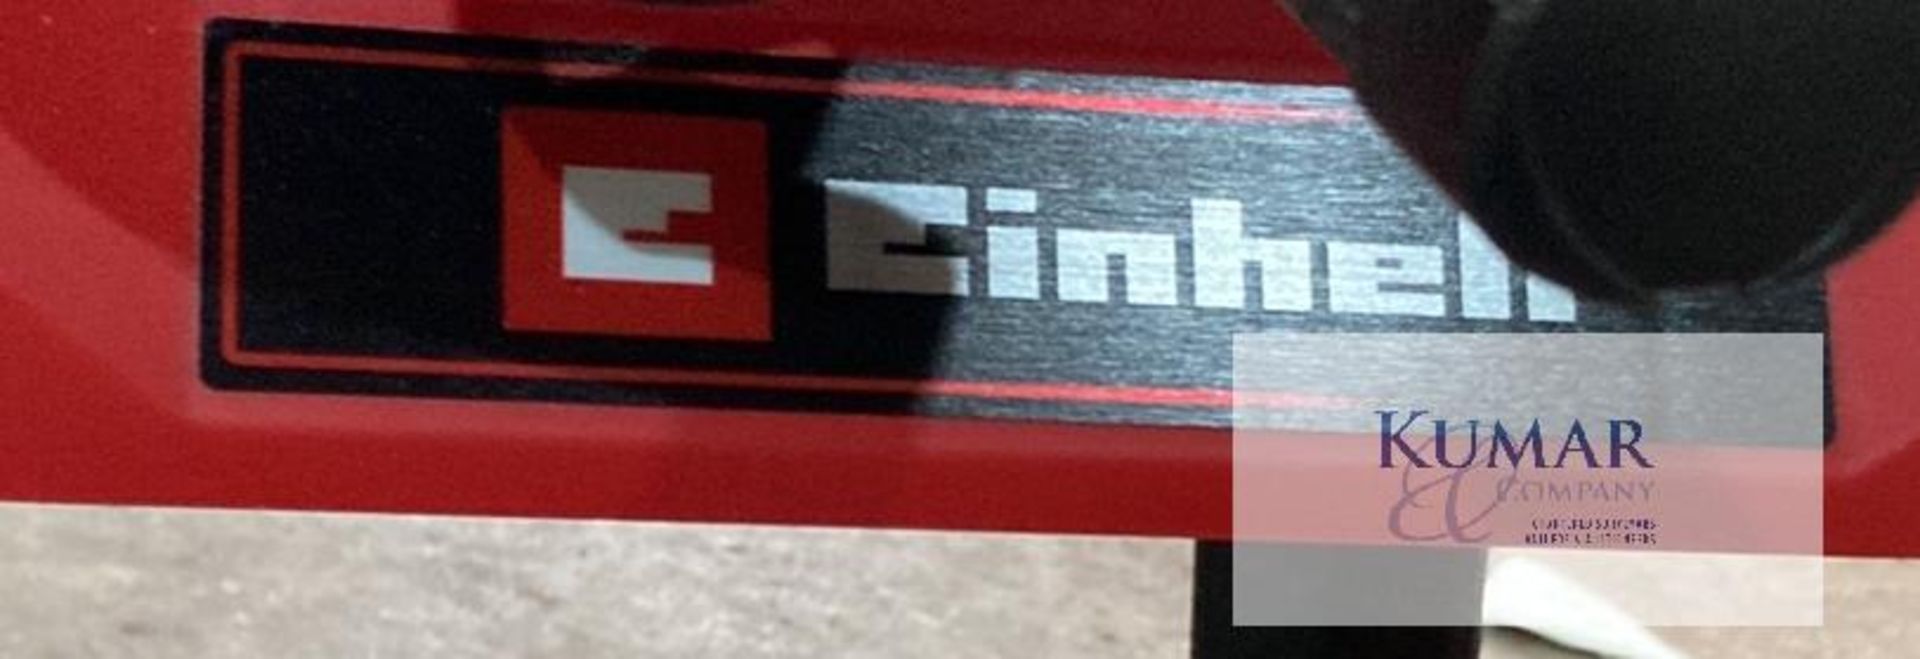 Einhell 254mm 2200W Table Saw 230V (£75 reserve!) - Image 4 of 8